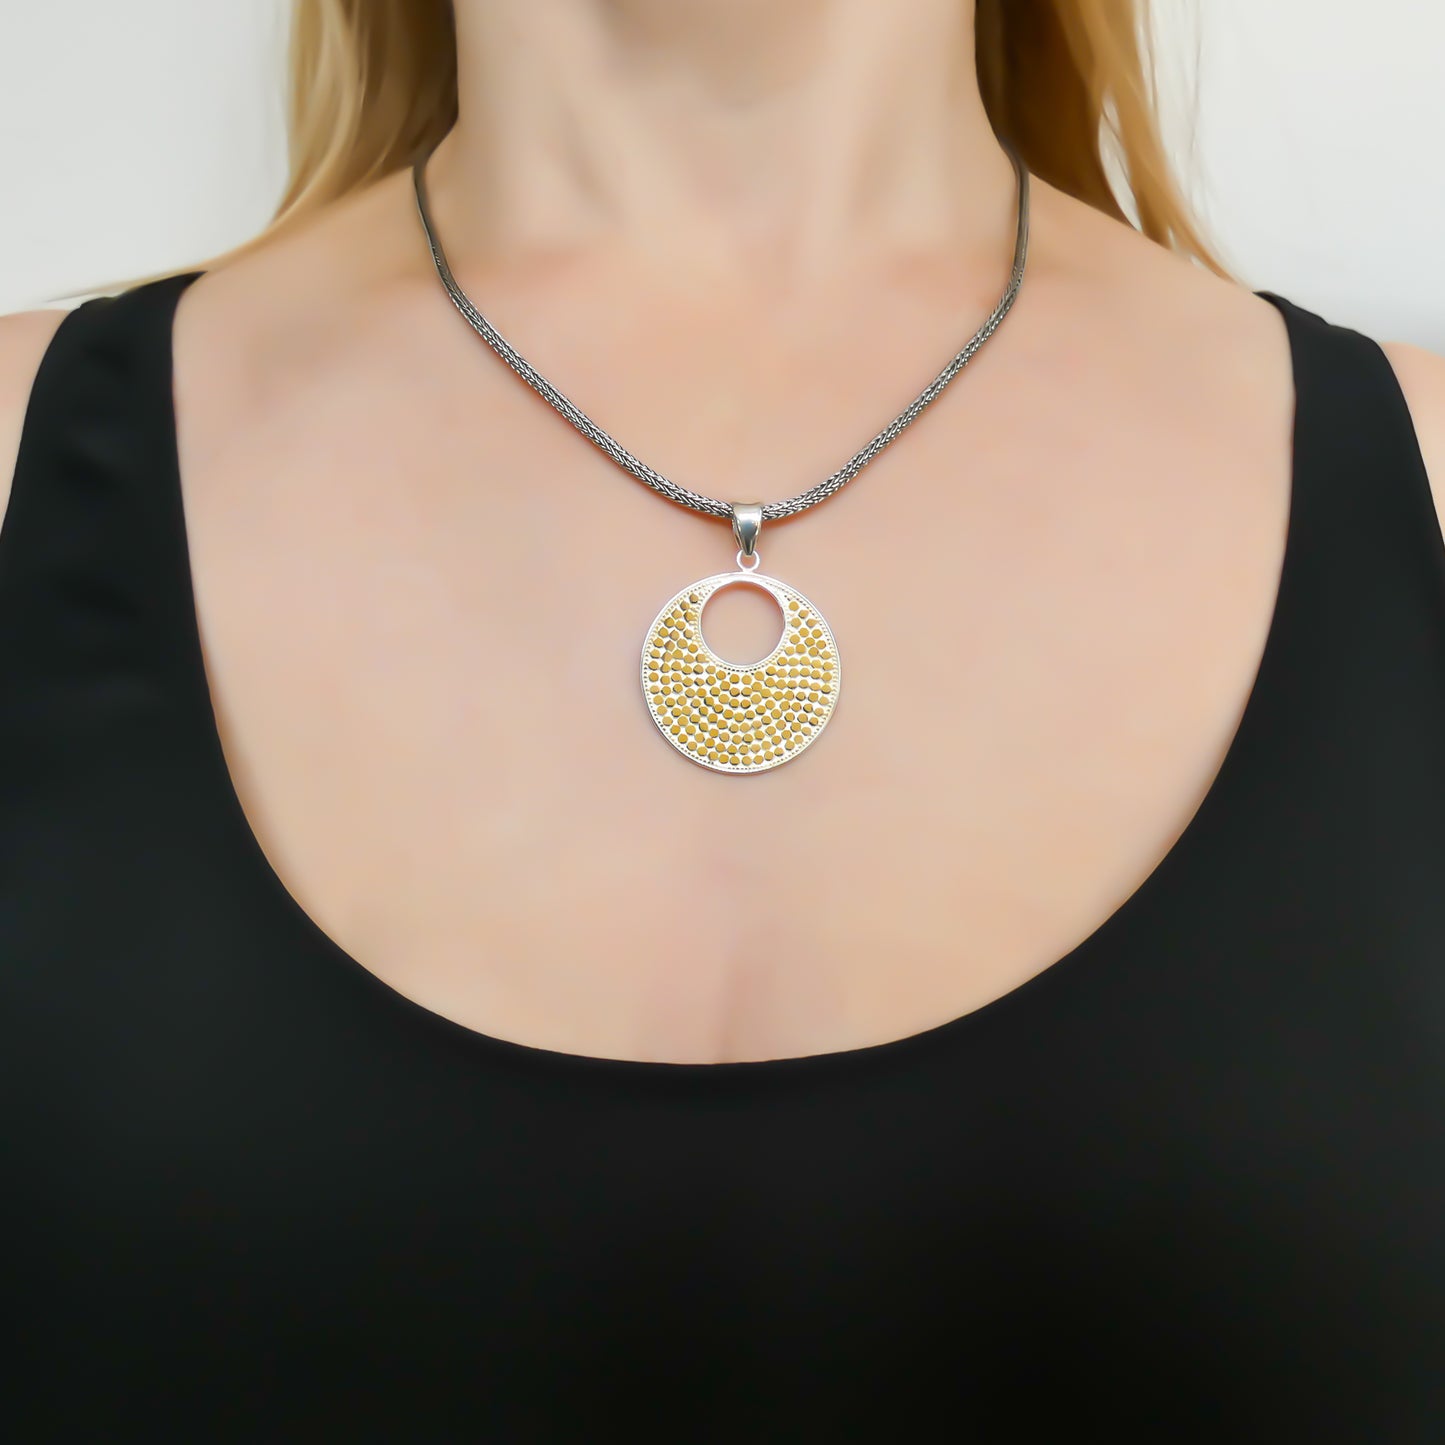 P234G SOHO .925 Sterling Silver Round Pendant with 18K Gold